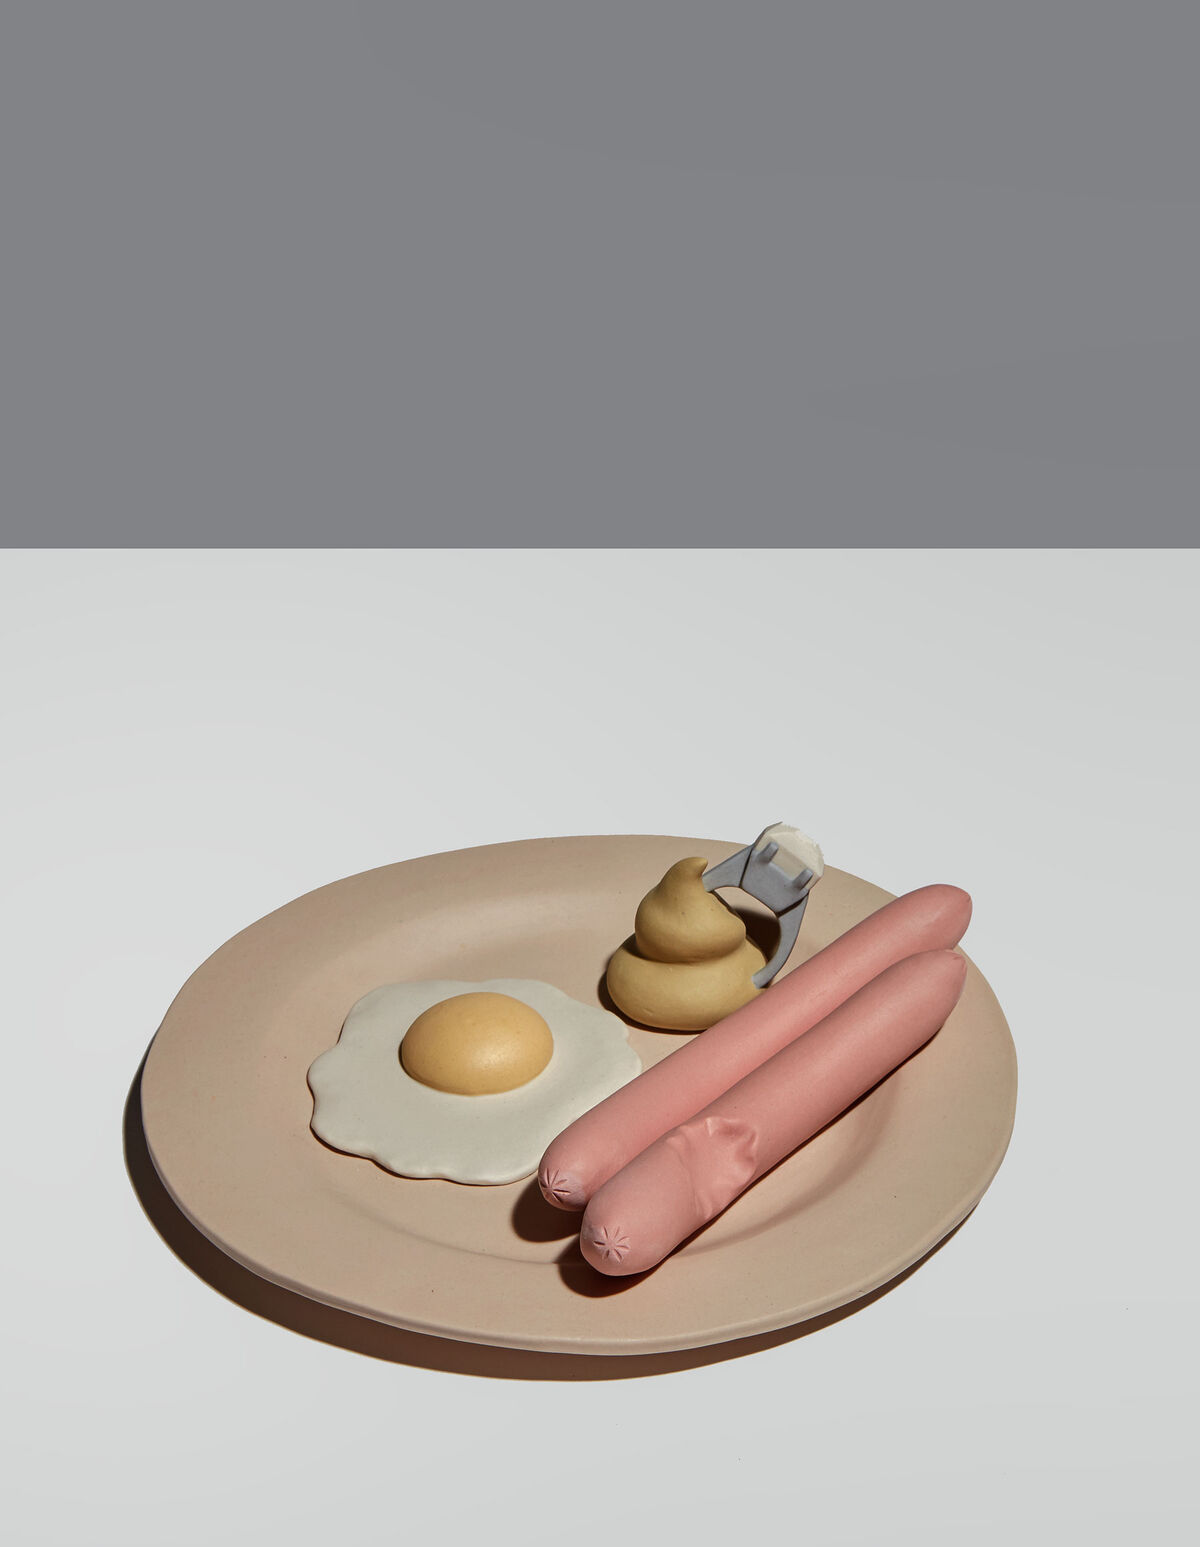 Genesis Belanger, Breakfast in Bed, 2019. Photo by Pauline Shapiro. Courtesy of the artist and Perrotin.